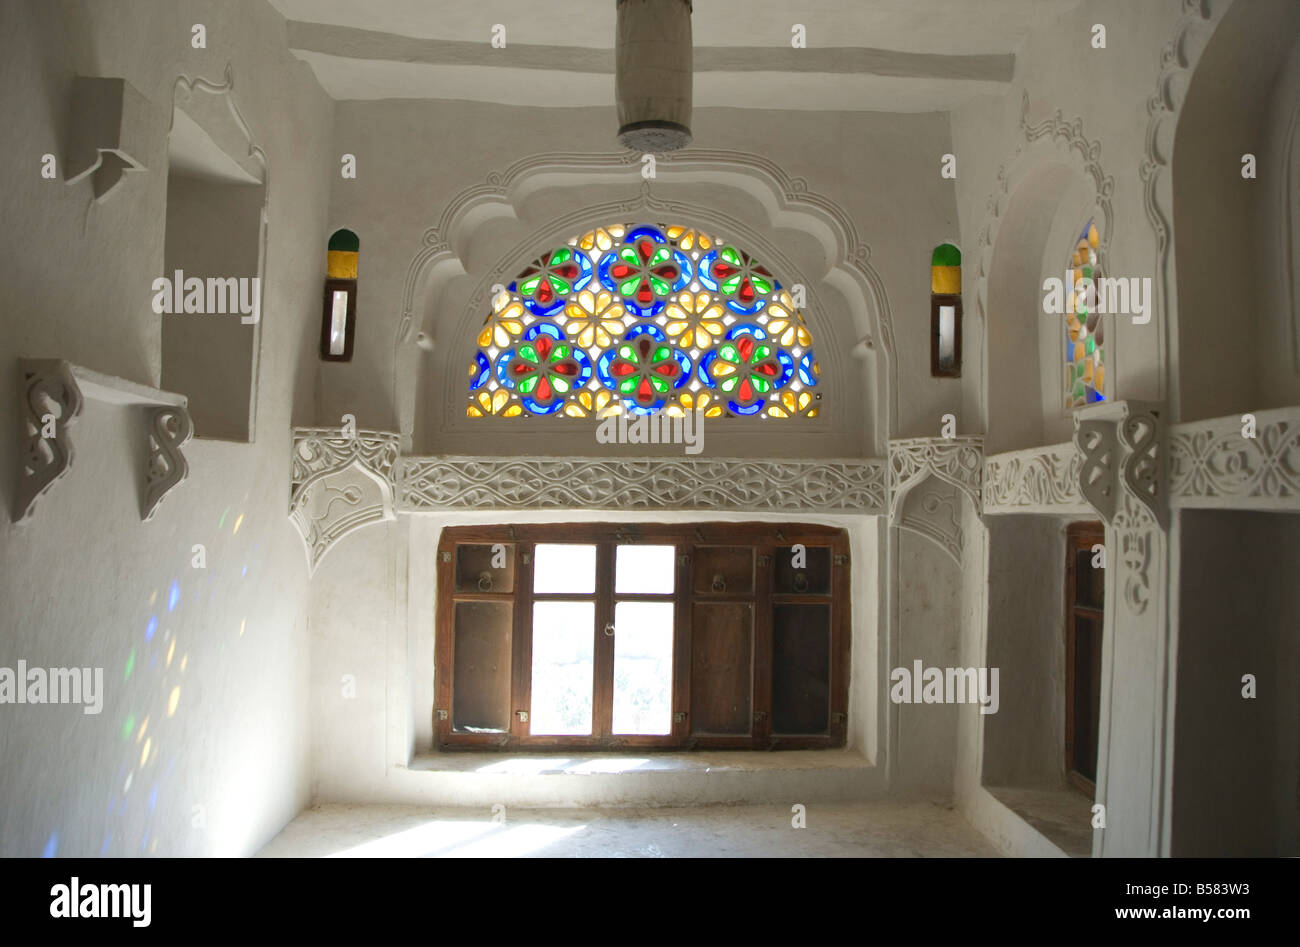 Traditional upper window of stained glass in upstairs room within the Dhar Alhajr, Wadi Dhahr, near Sana'a, Yemen Stock Photo